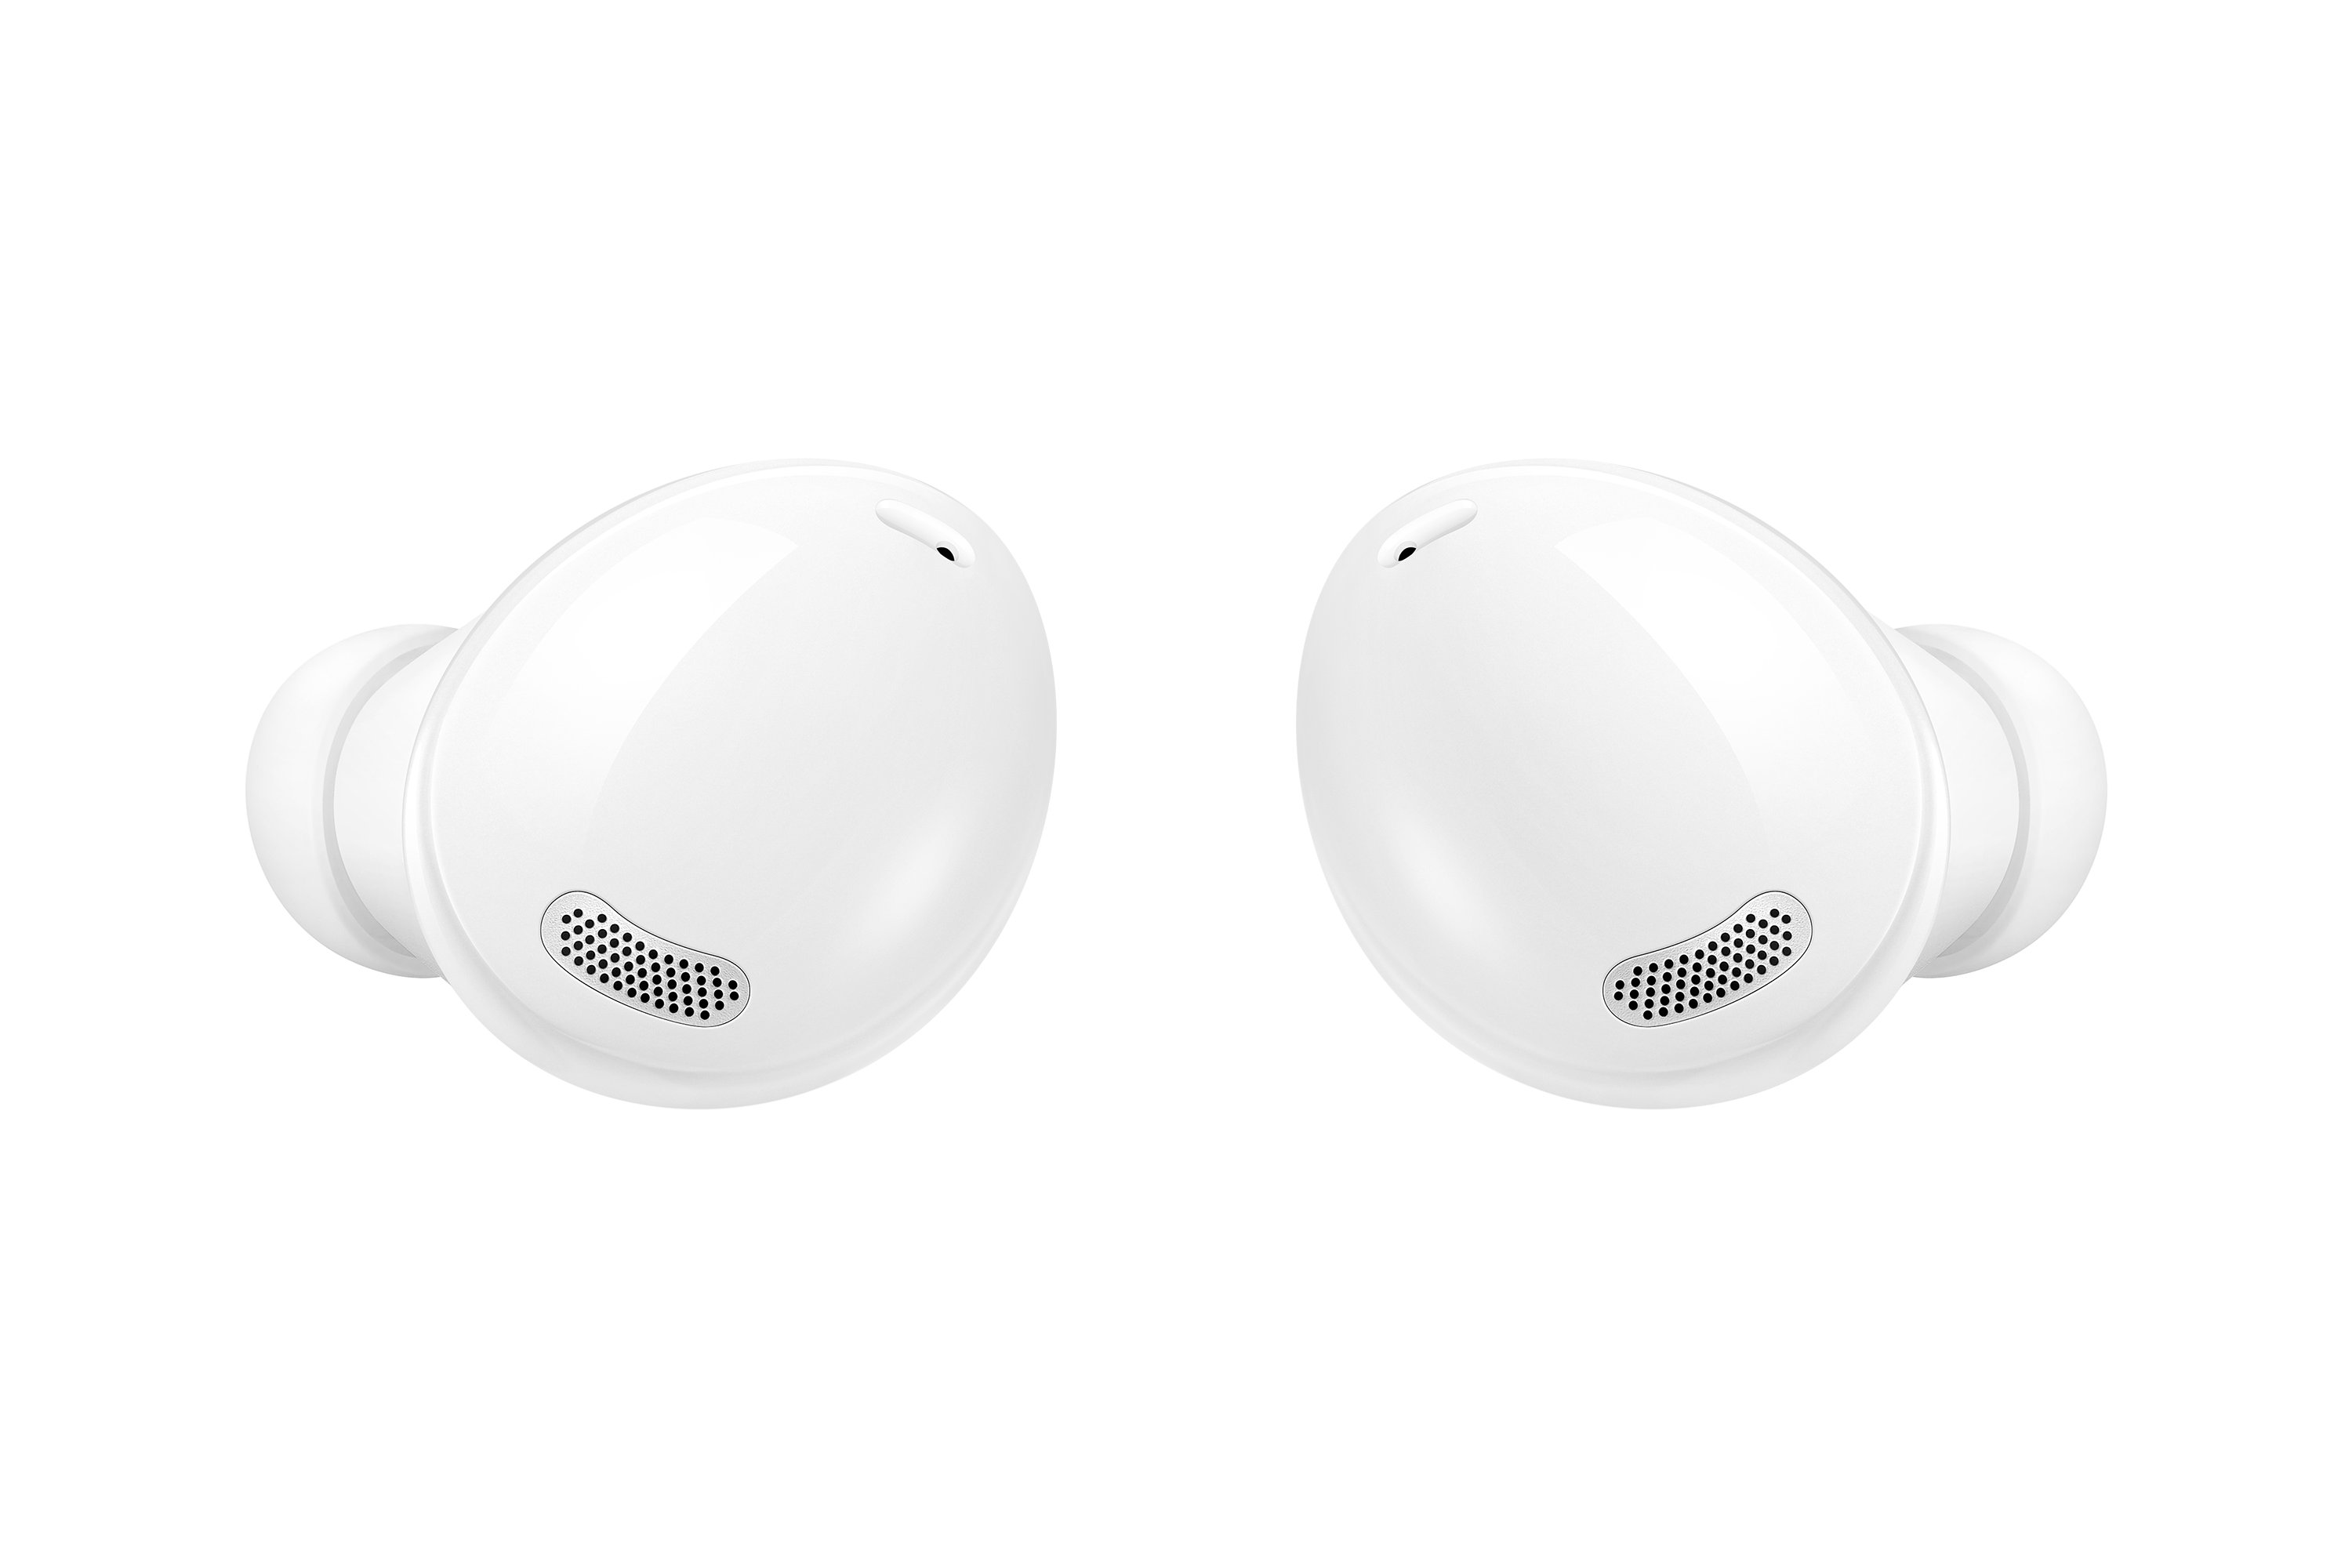 Samsung Galaxy Buds Pro coming in a beautiful new white shade ...